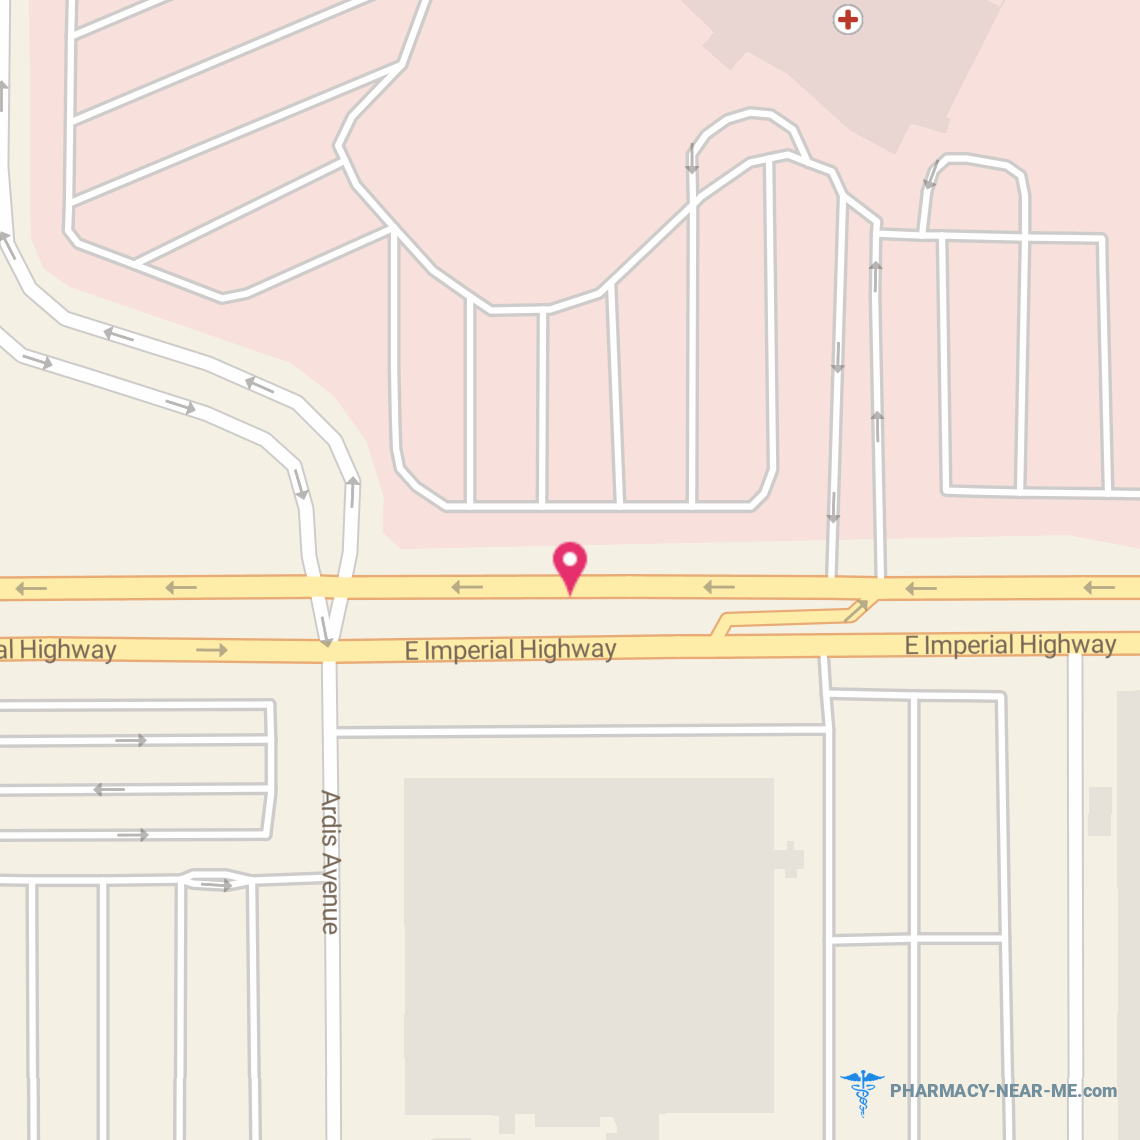 KAISER FOUND HOSPITAL PHARMACY #054 - Pharmacy Hours, Phone, Reviews & Information: 9333 Hwy Imperial, Downey, CA 90242